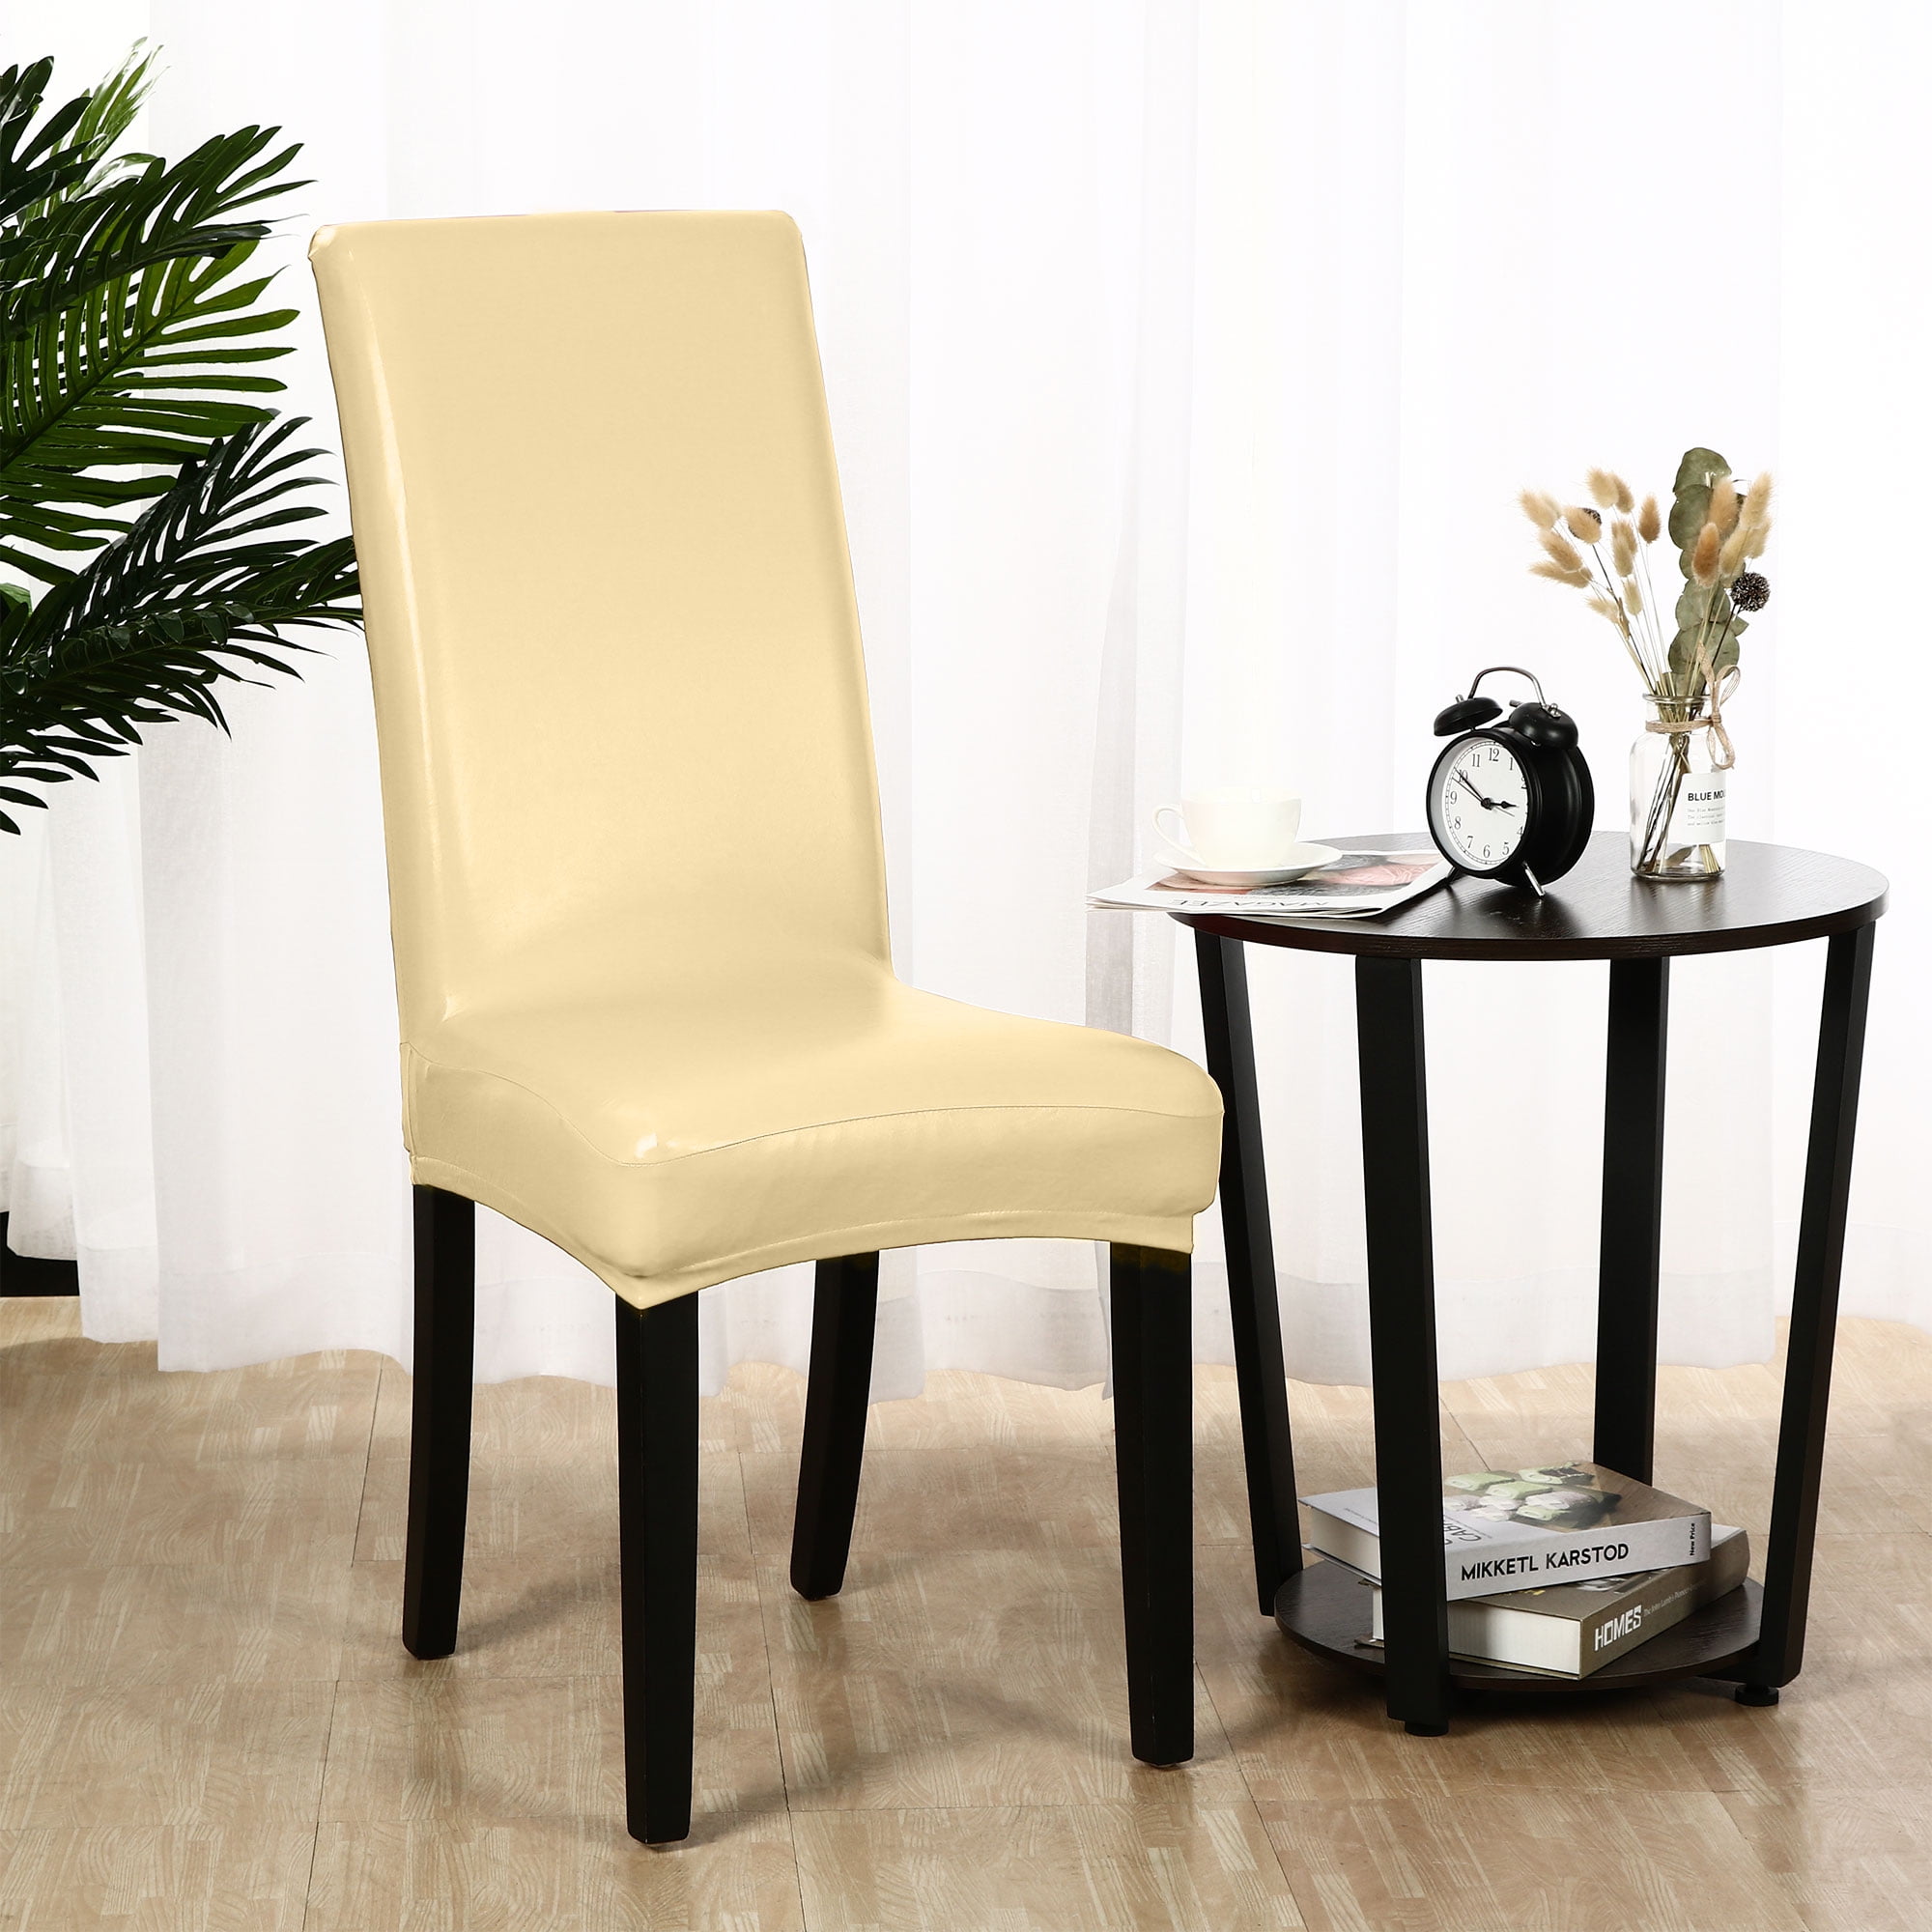 Chair Cover PU Leather Waterproof Oilproof Removable Home Decoration Dining Room 